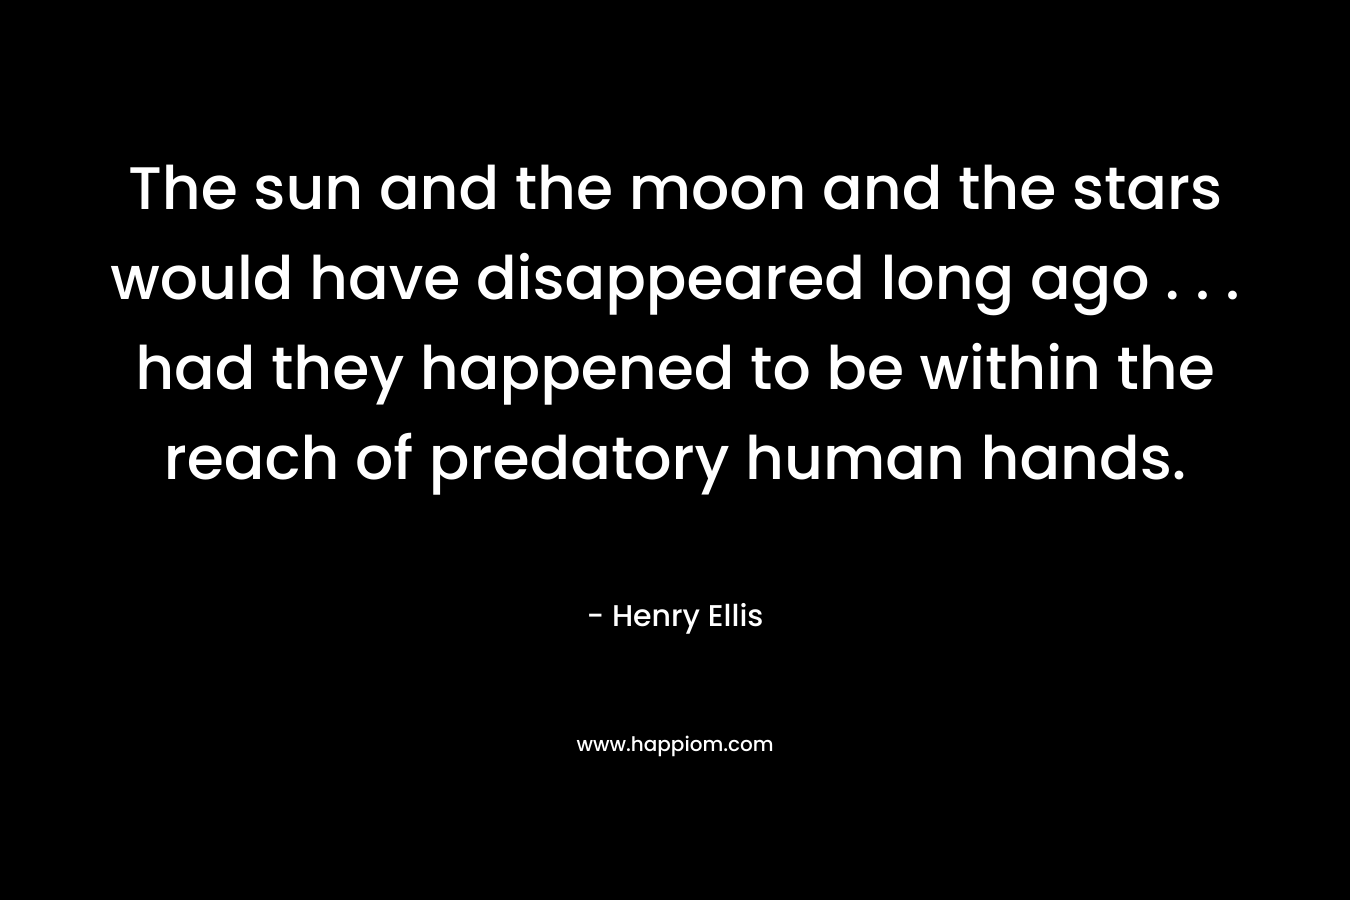 The sun and the moon and the stars would have disappeared long ago . . . had they happened to be within the reach of predatory human hands. – Henry Ellis